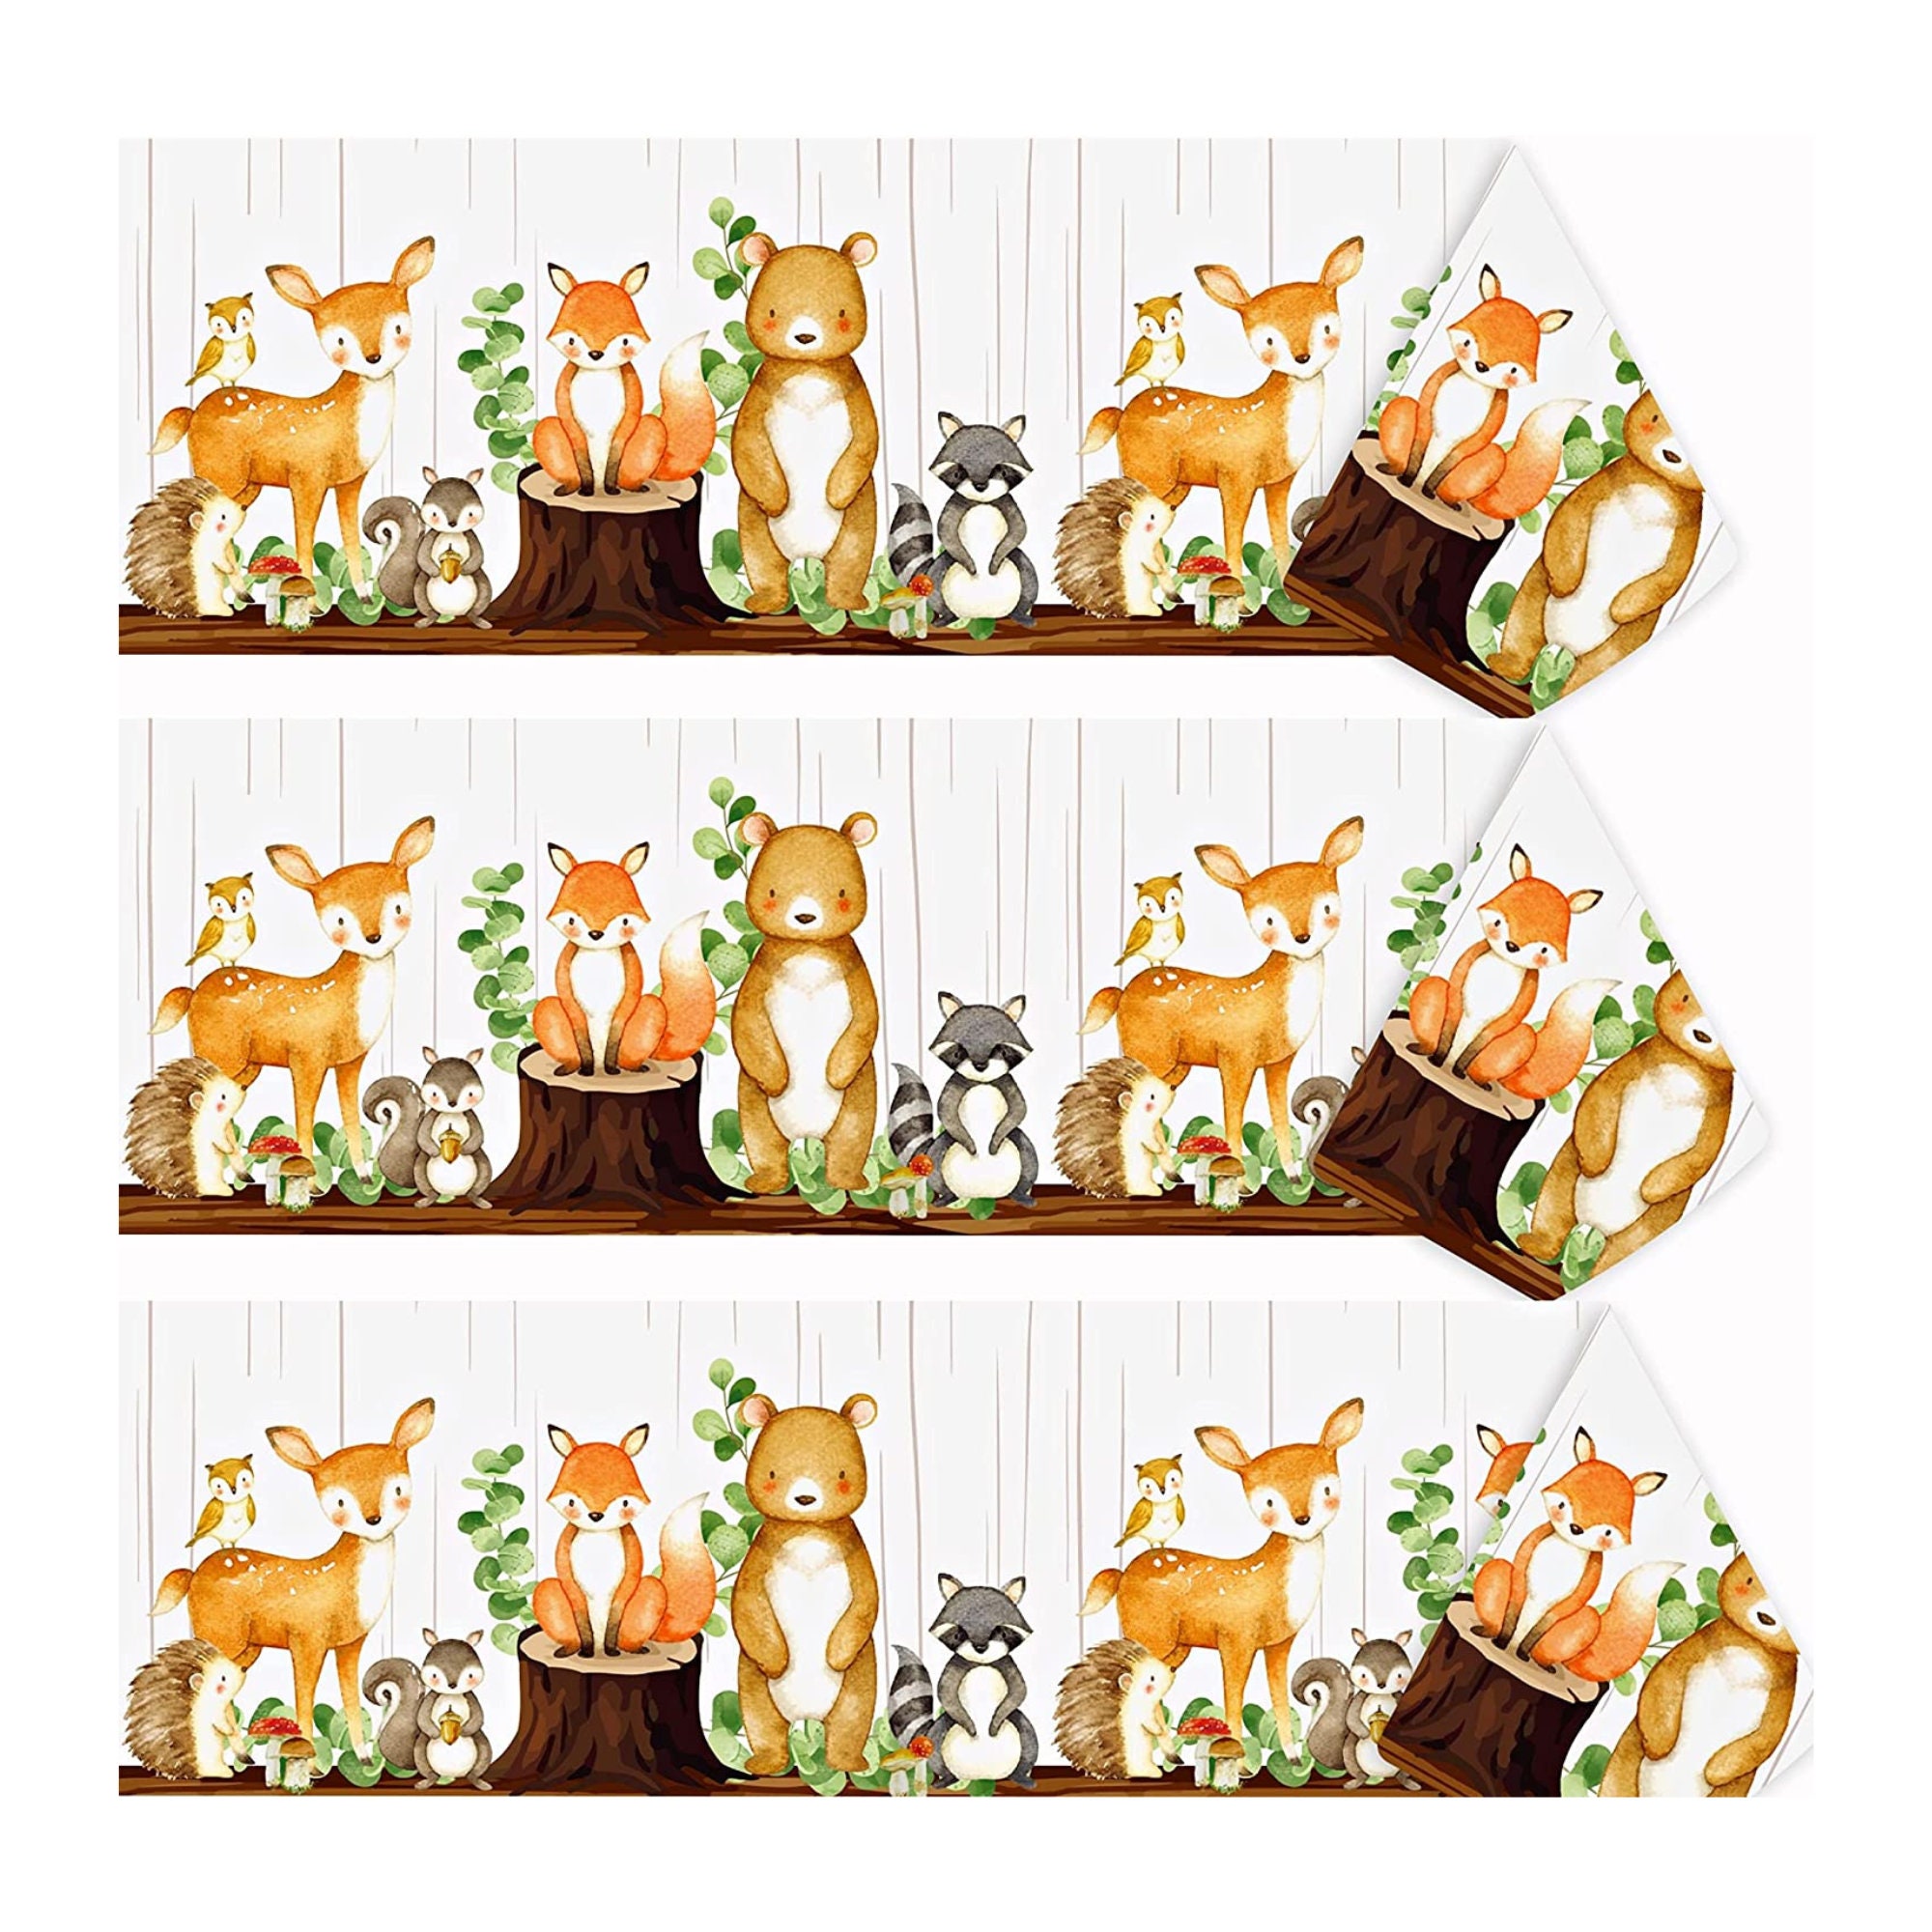 Arctic Fox Confetti, Woodland Decorations, Animal Party Supplies, Woodland  Theme, Rustic Party Supplies, Fox Decorations, Table Scatter, Fox Cut Out